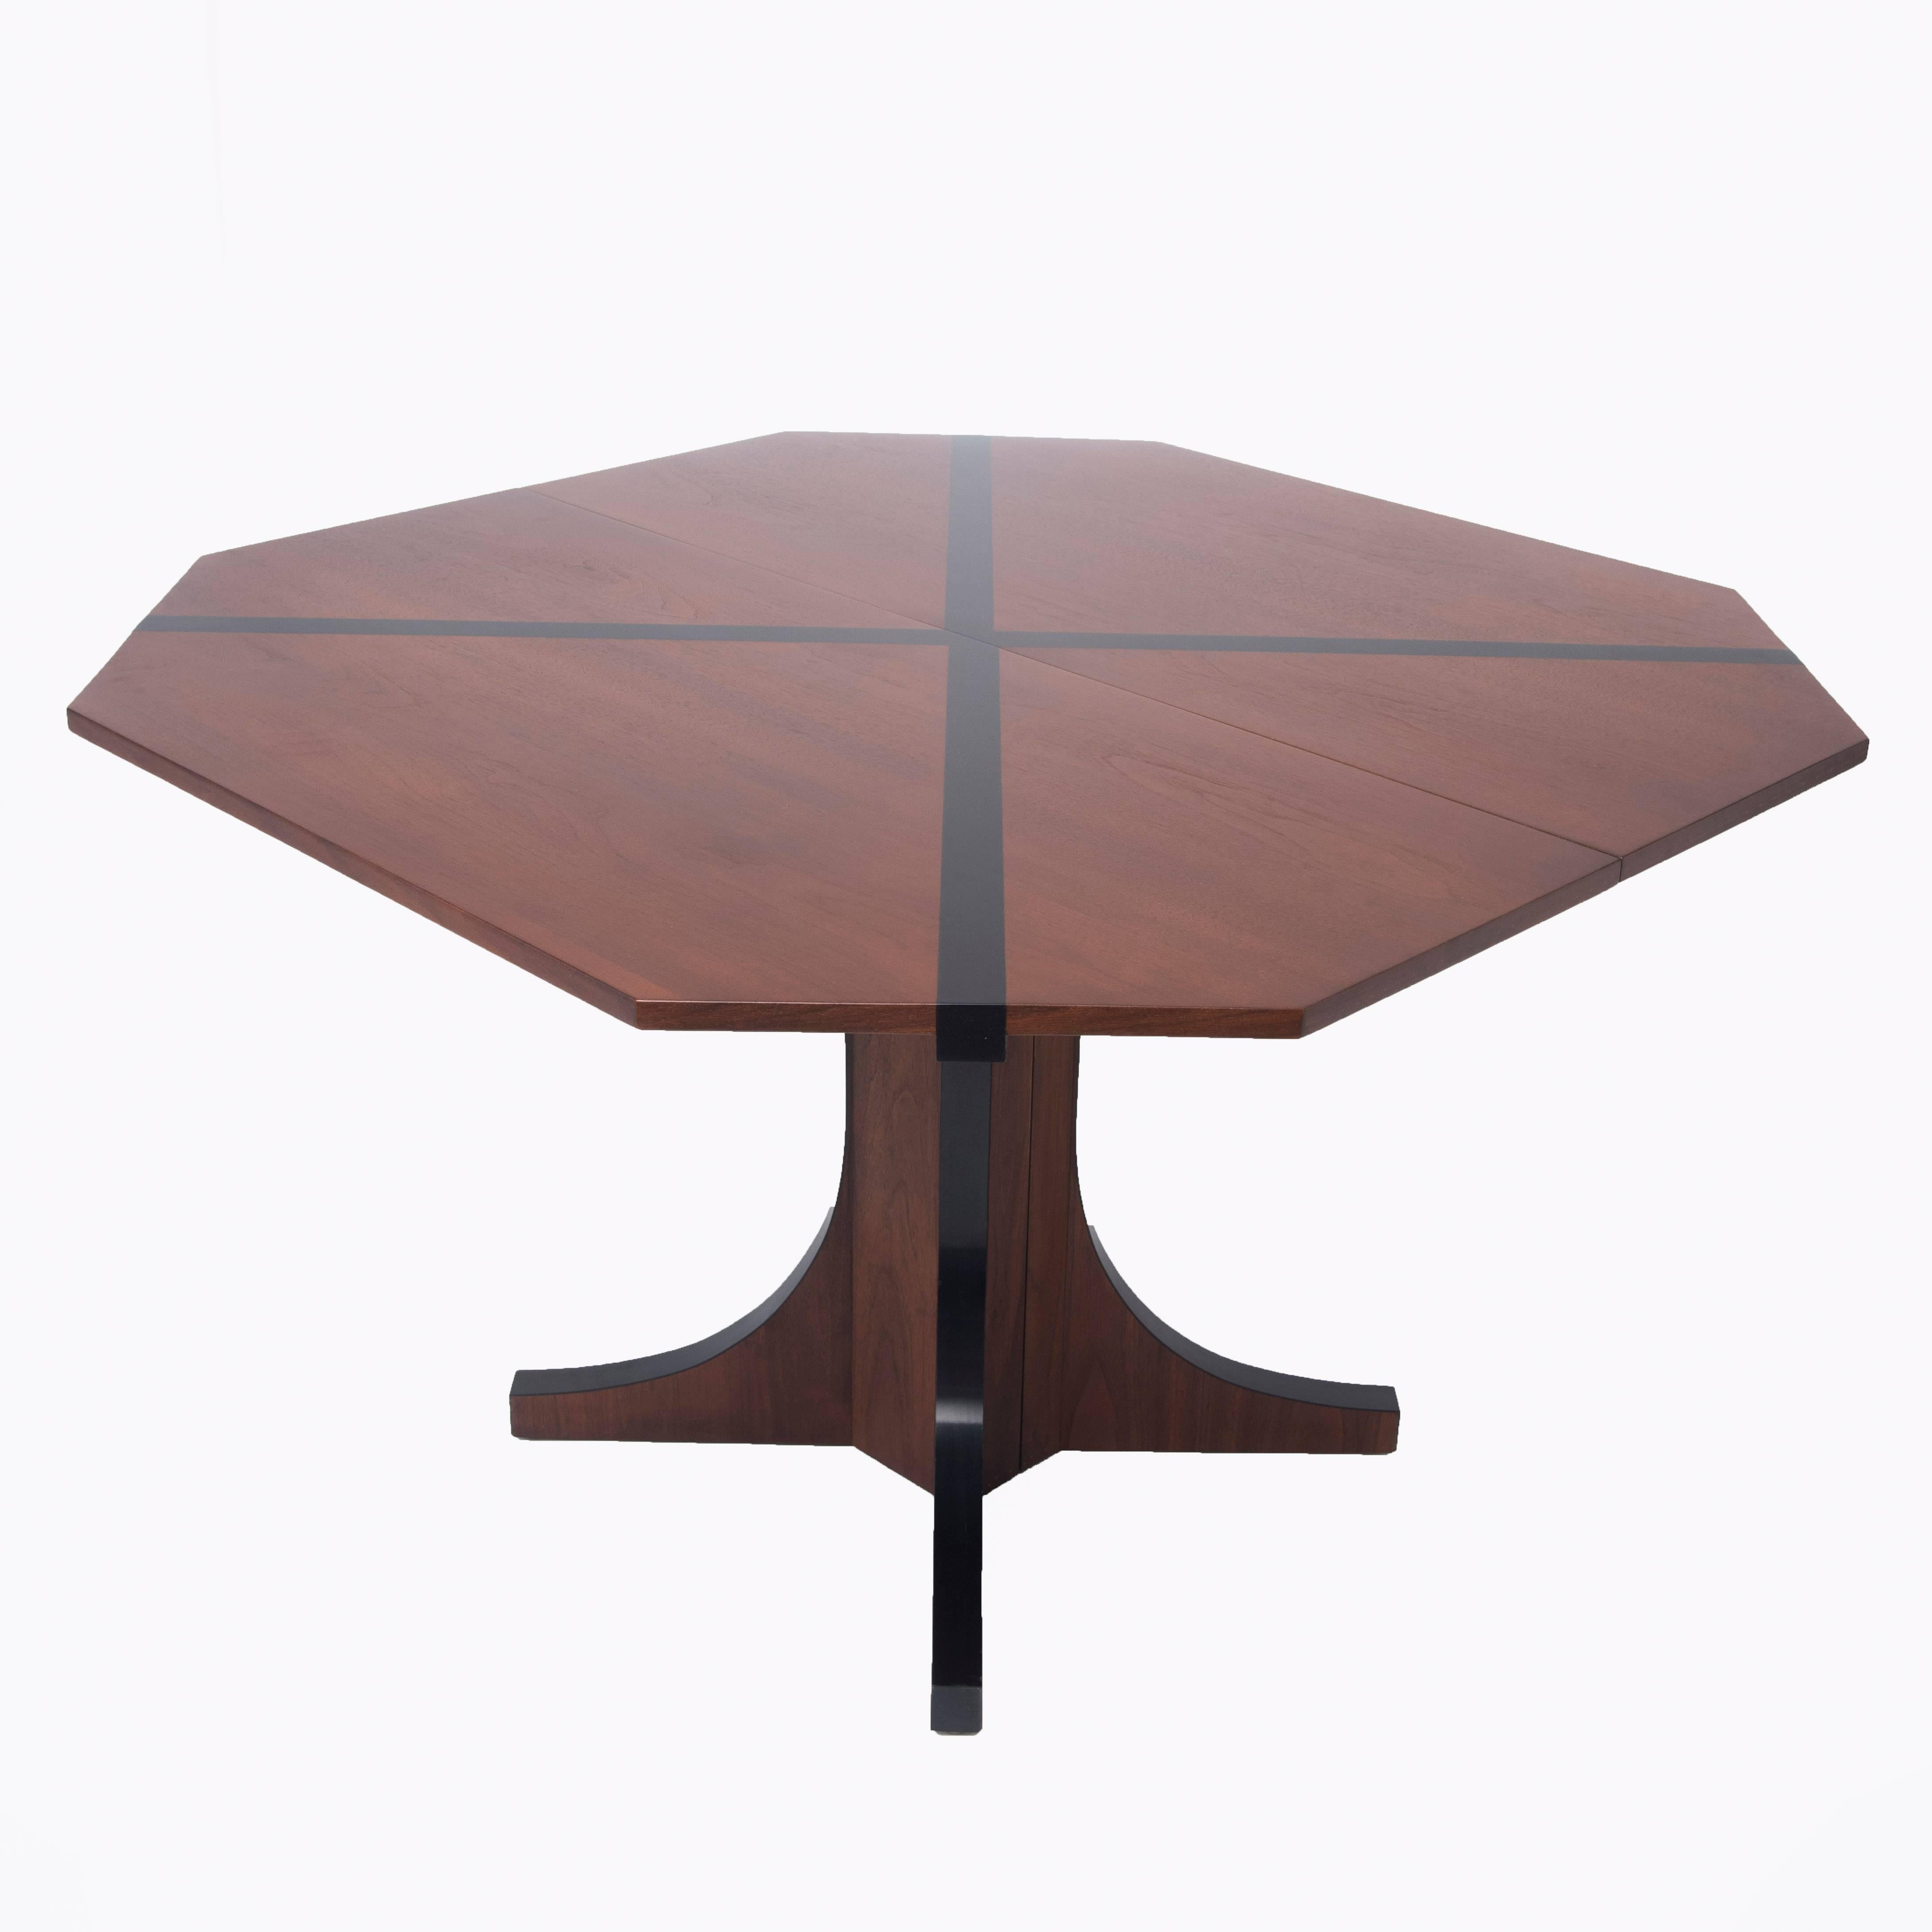 A dining table designed by John Kapel for Glenn of California with a truncated square top inlaid with a black laminate detail in the shape of an "X". The table has two walnut insert leaves that elongate the table to a rectangle with